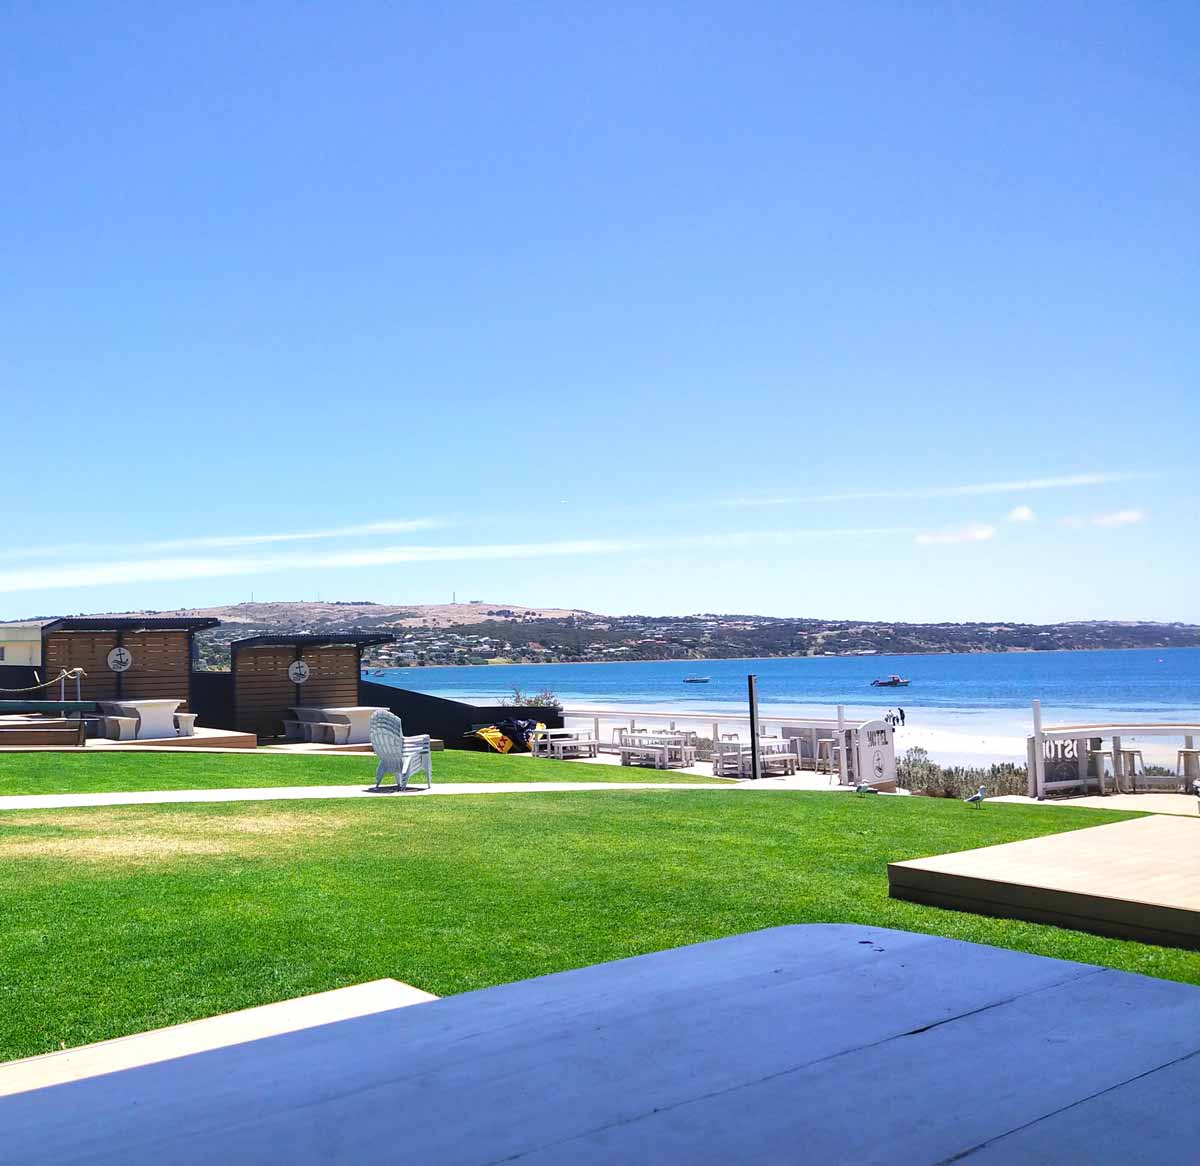 Beer garden with ocean views at Hotel Boston. Located in Port Lincoln, Eyre Peninsula, South Australia.